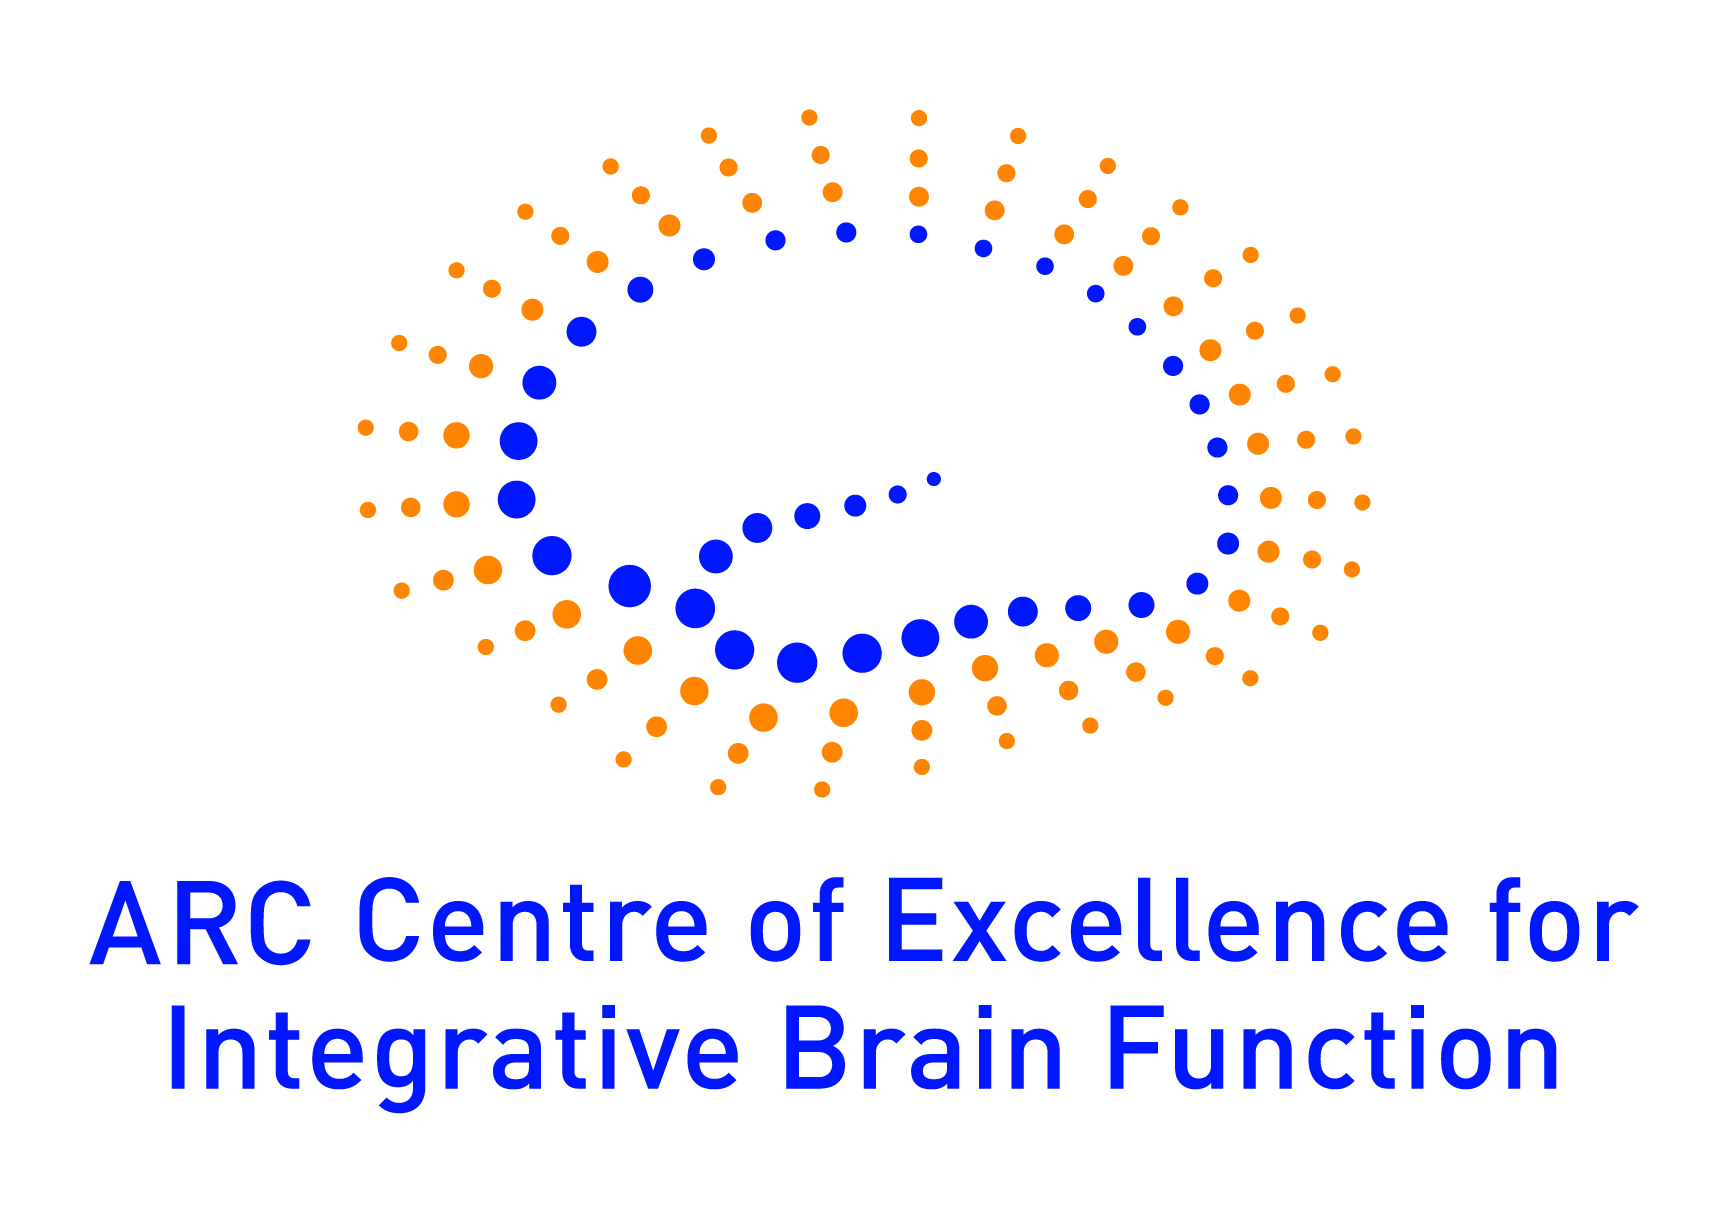 Brain Function ARC and name under